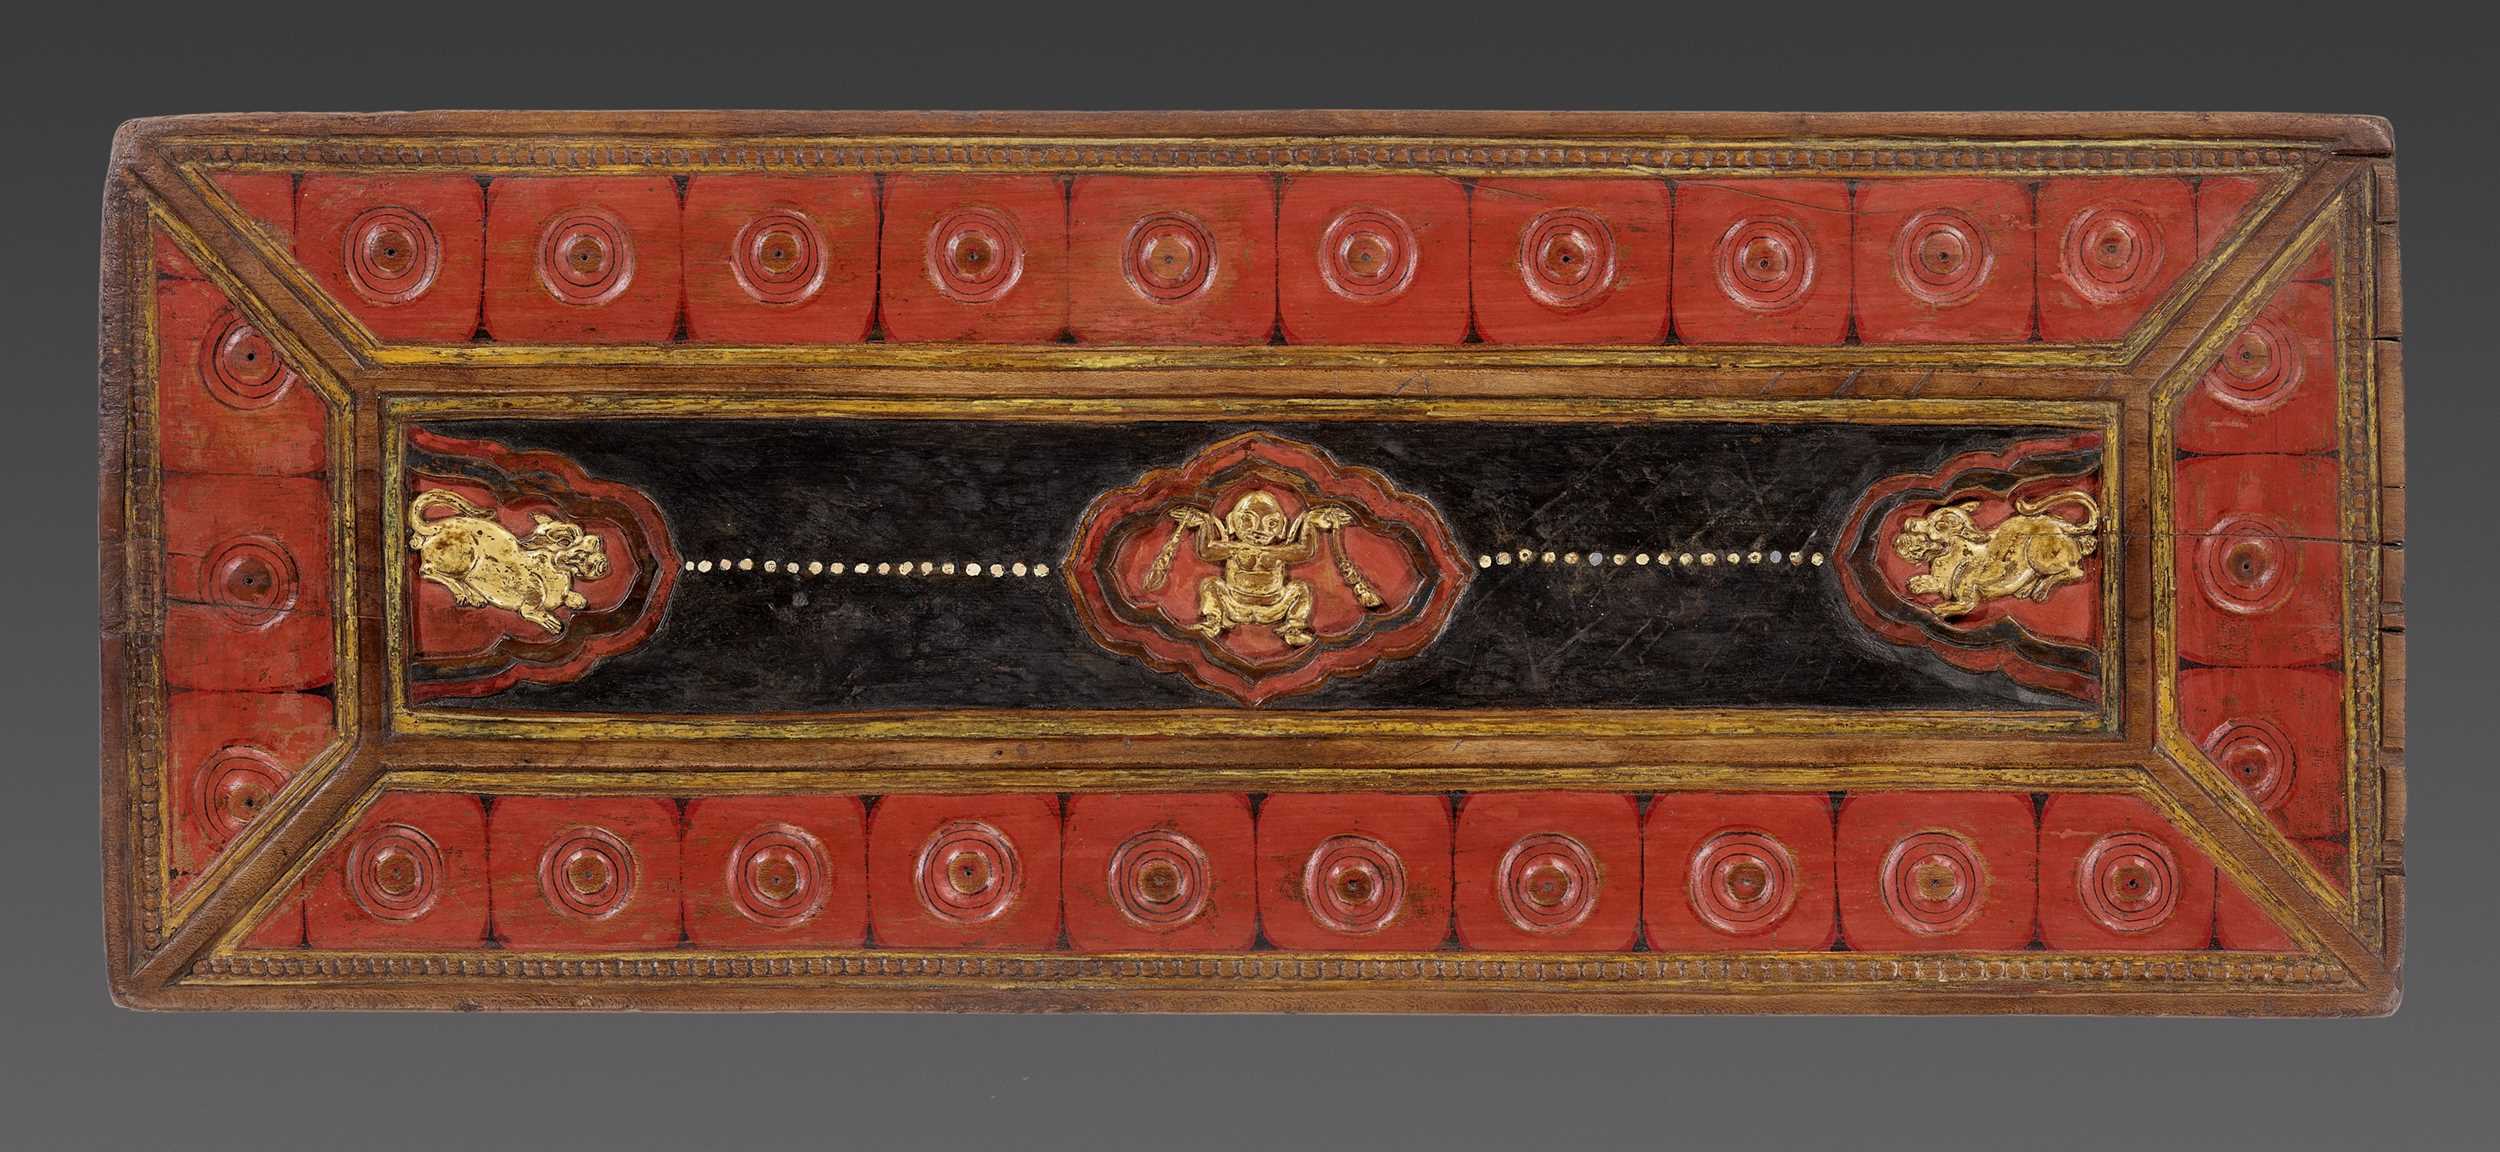 Lot 552 - A PAINTED AND GILT WOOD MANUSCRIPT COVER, TIBET, 14TH-15TH CENTURY